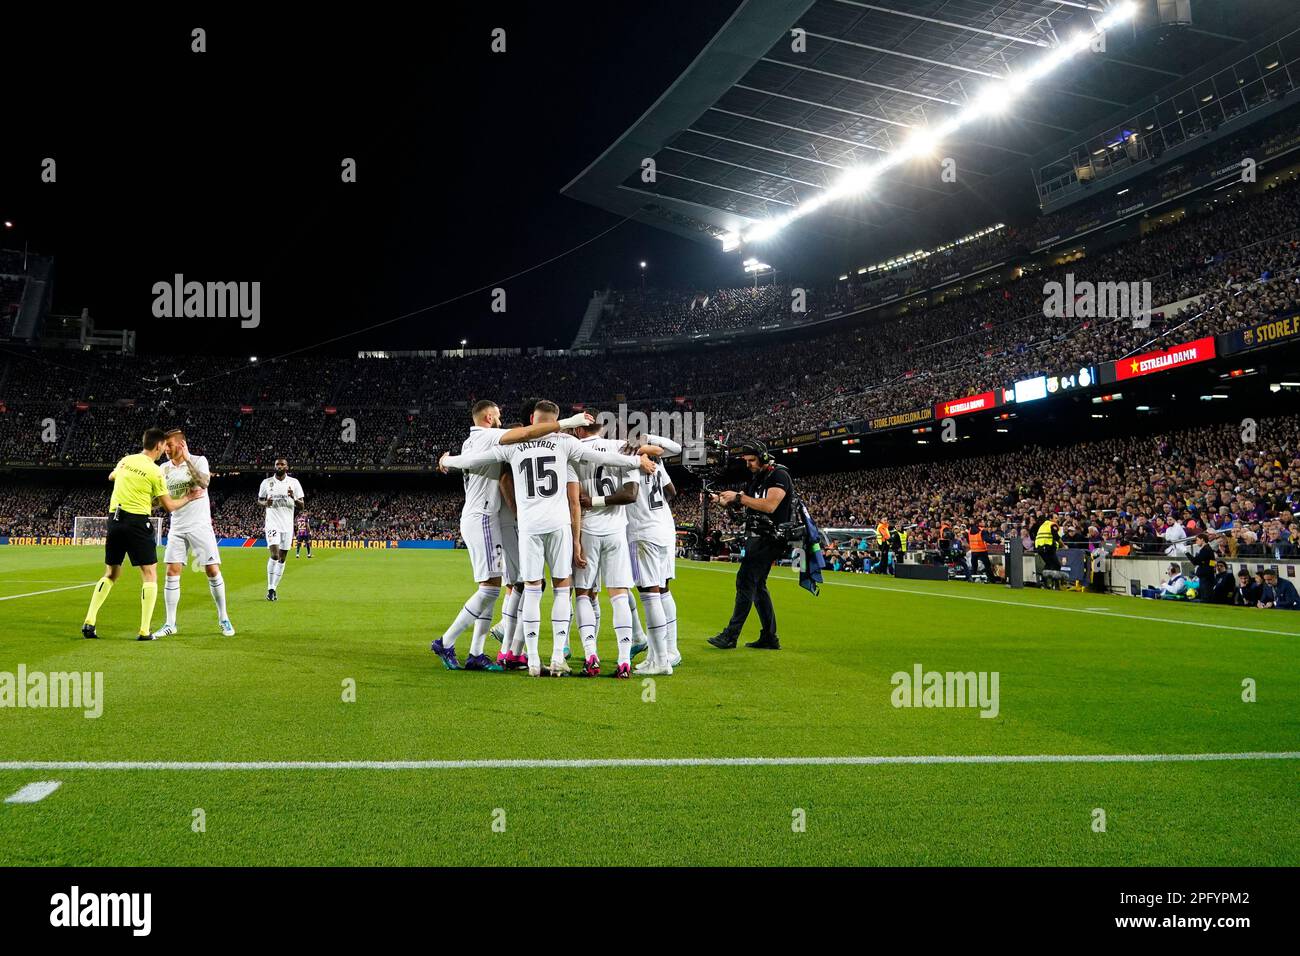 Barcelona, Spain. 19th Mar, 2023. Real Madrid players celebrating the Ronald Araujo own goal during the La Liga match between FC Barcelona and Real Madrid played at Spotify Camp Nou Stadium on March 19, 2023 in Barcelona, Spain. (Photo by Colas Buera/PRESSIN) Credit: PRESSINPHOTO SPORTS AGENCY/Alamy Live News Stock Photo